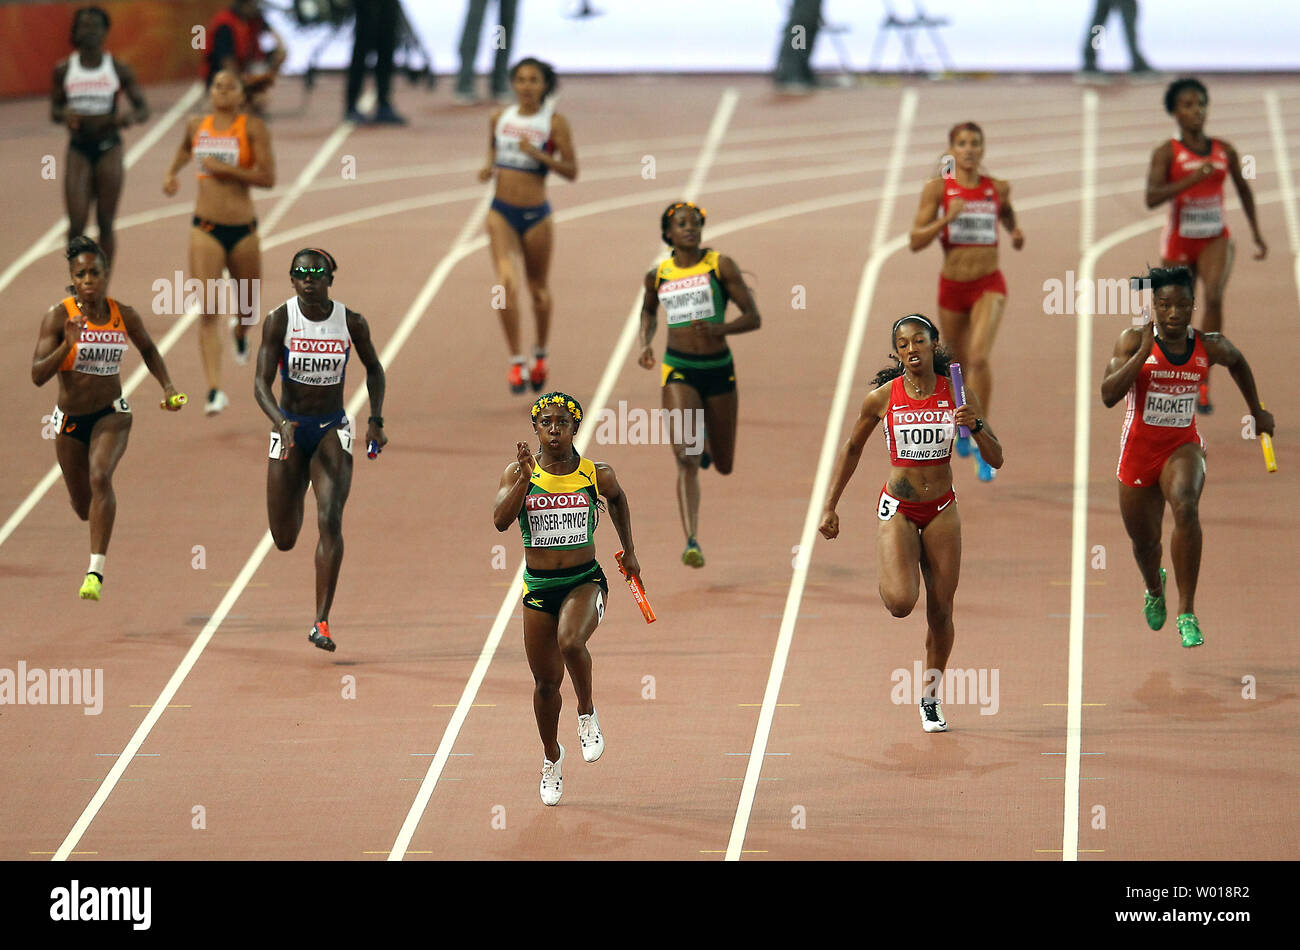 (L-R) Netherlands, Great Britain, Jamaica, USA and Trinidad and Tobago compete in the 4x100 meters women's relay final at the IAAF World Championships being hosted by Beijing on August 29, 2015.  Jamaica won with a time of 41.07 seconds, followed by USA (41.68) and Trinidad and Tobago (42.03) in third.      Photo by Stephen Shaver/UPI Stock Photo